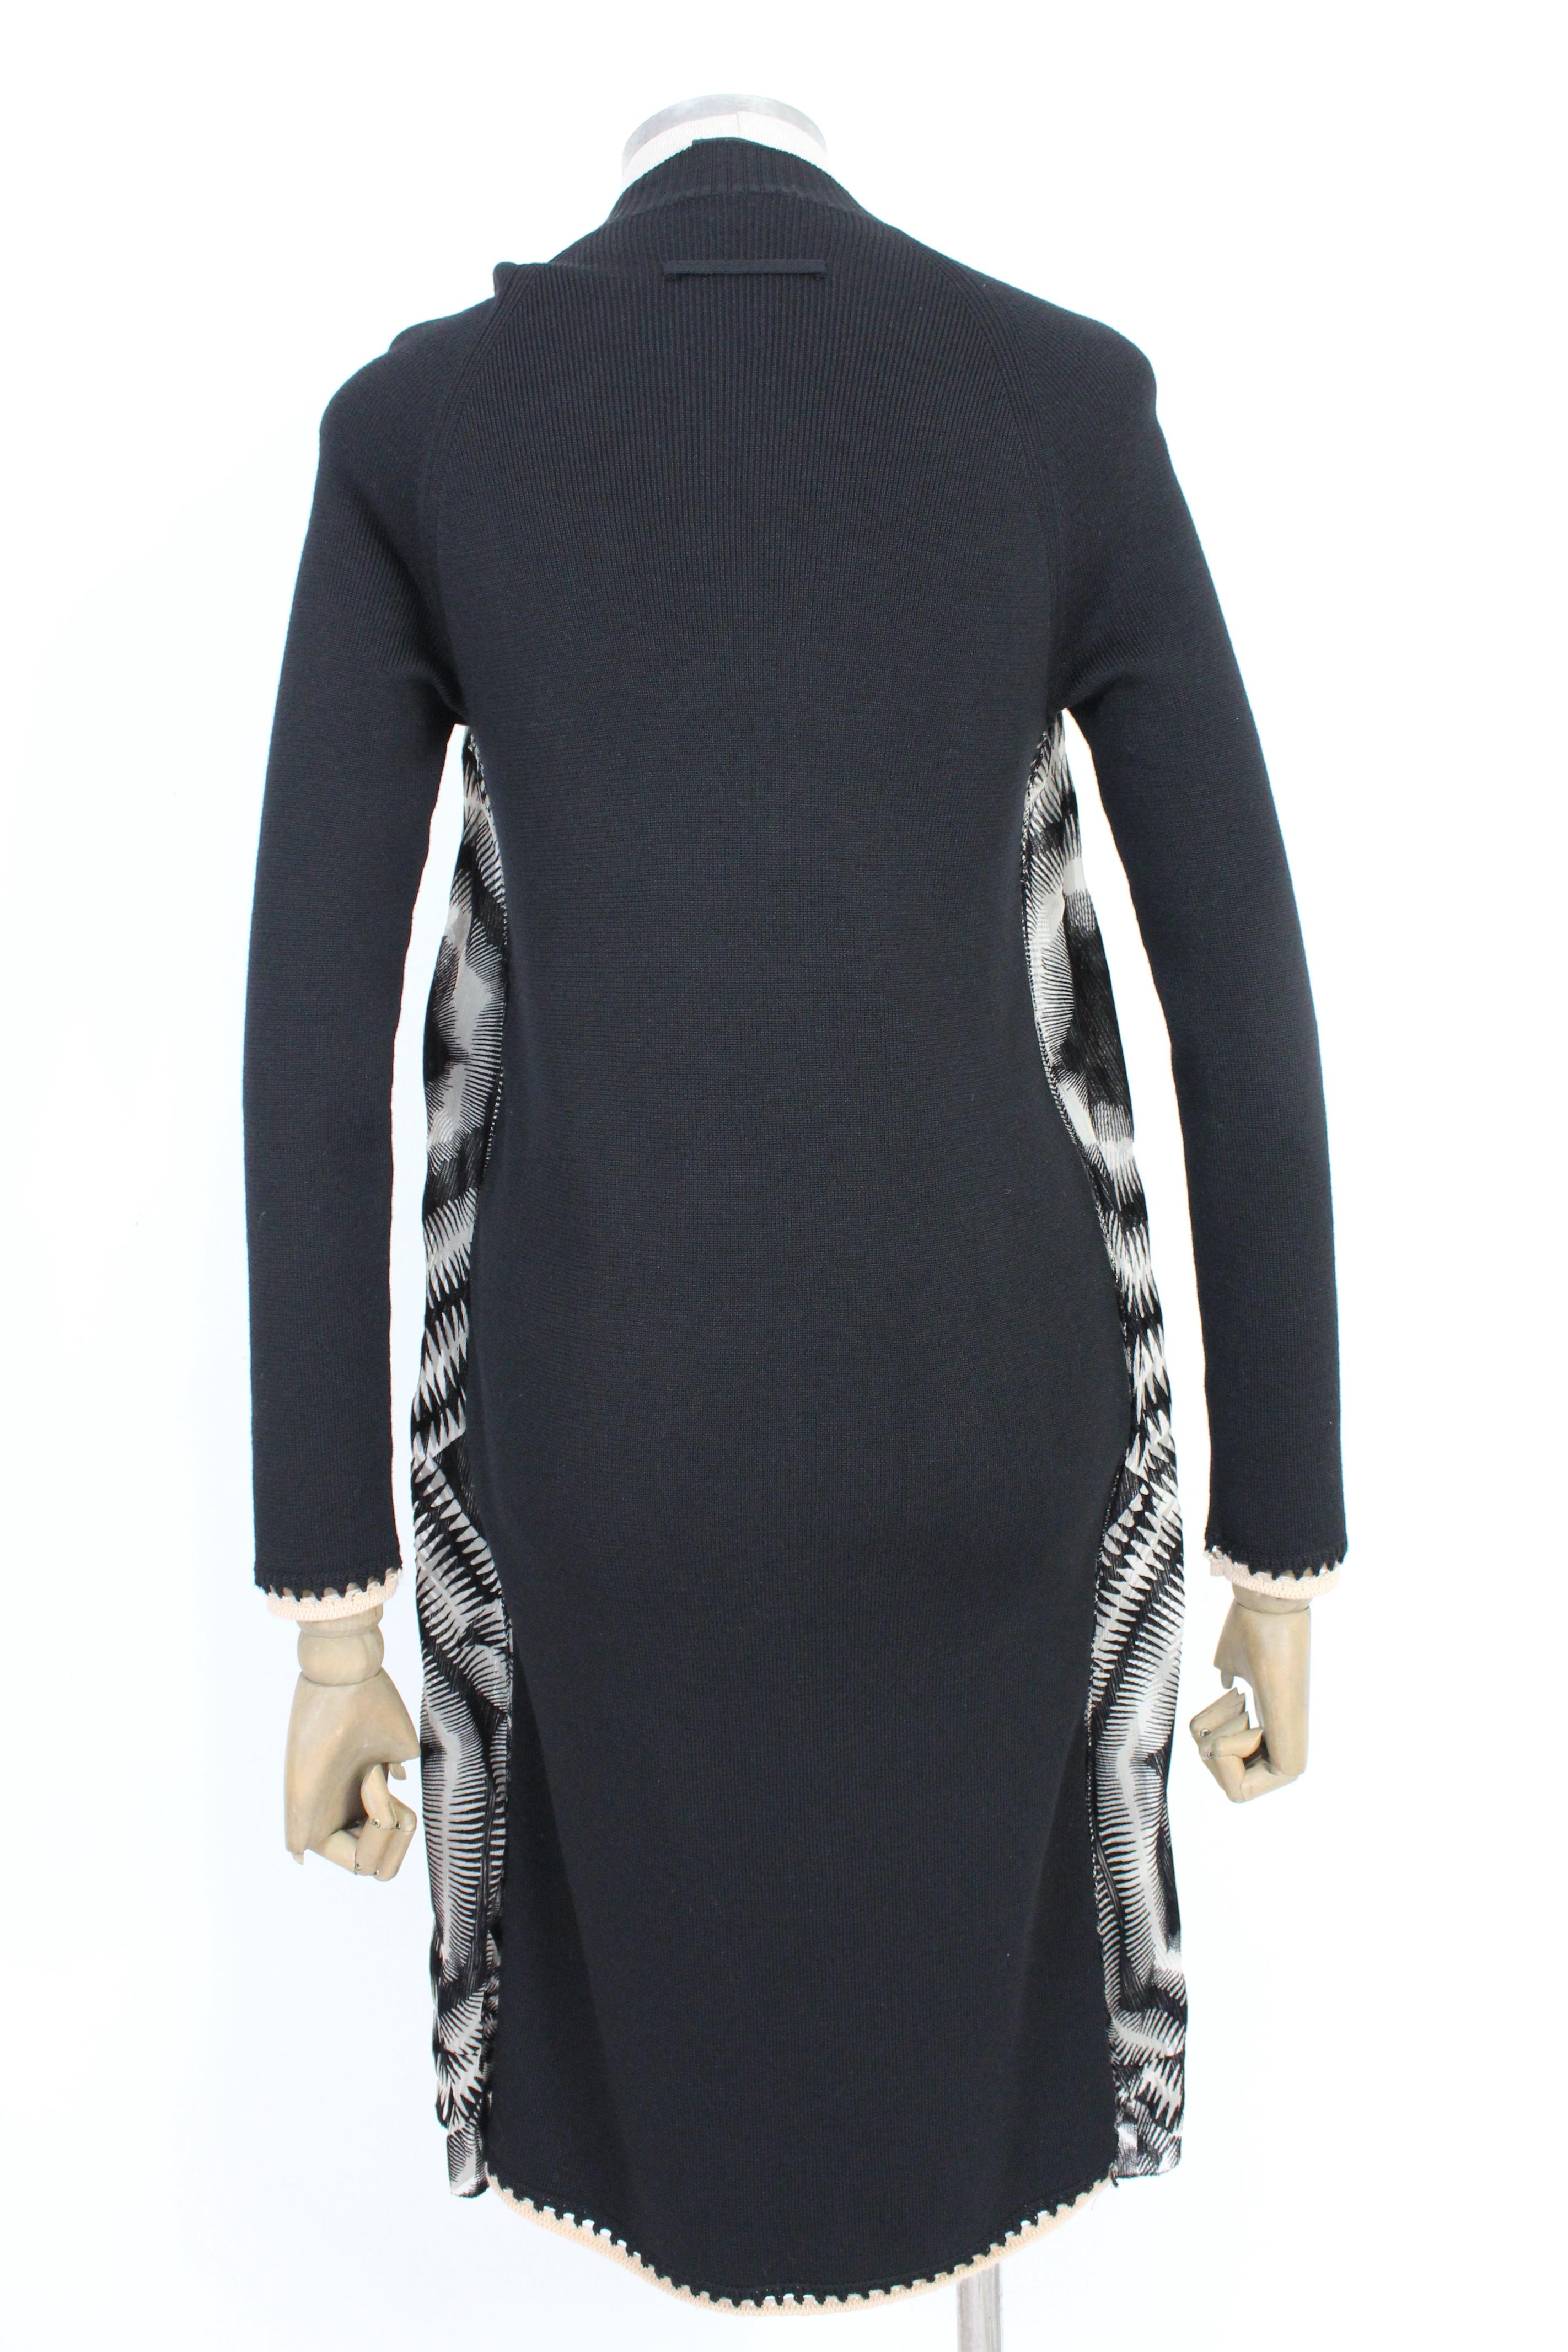 Jean Paul Gaultier Maille vintage 90s dress. Short black and white dress with psychedelic pattern. Shoulder and sleeves in wool, on the front in Fuzzi micro mesh and silk. Fabric 80% wool, 20% silk, internally lined. Made in Italy.

Condition: Very